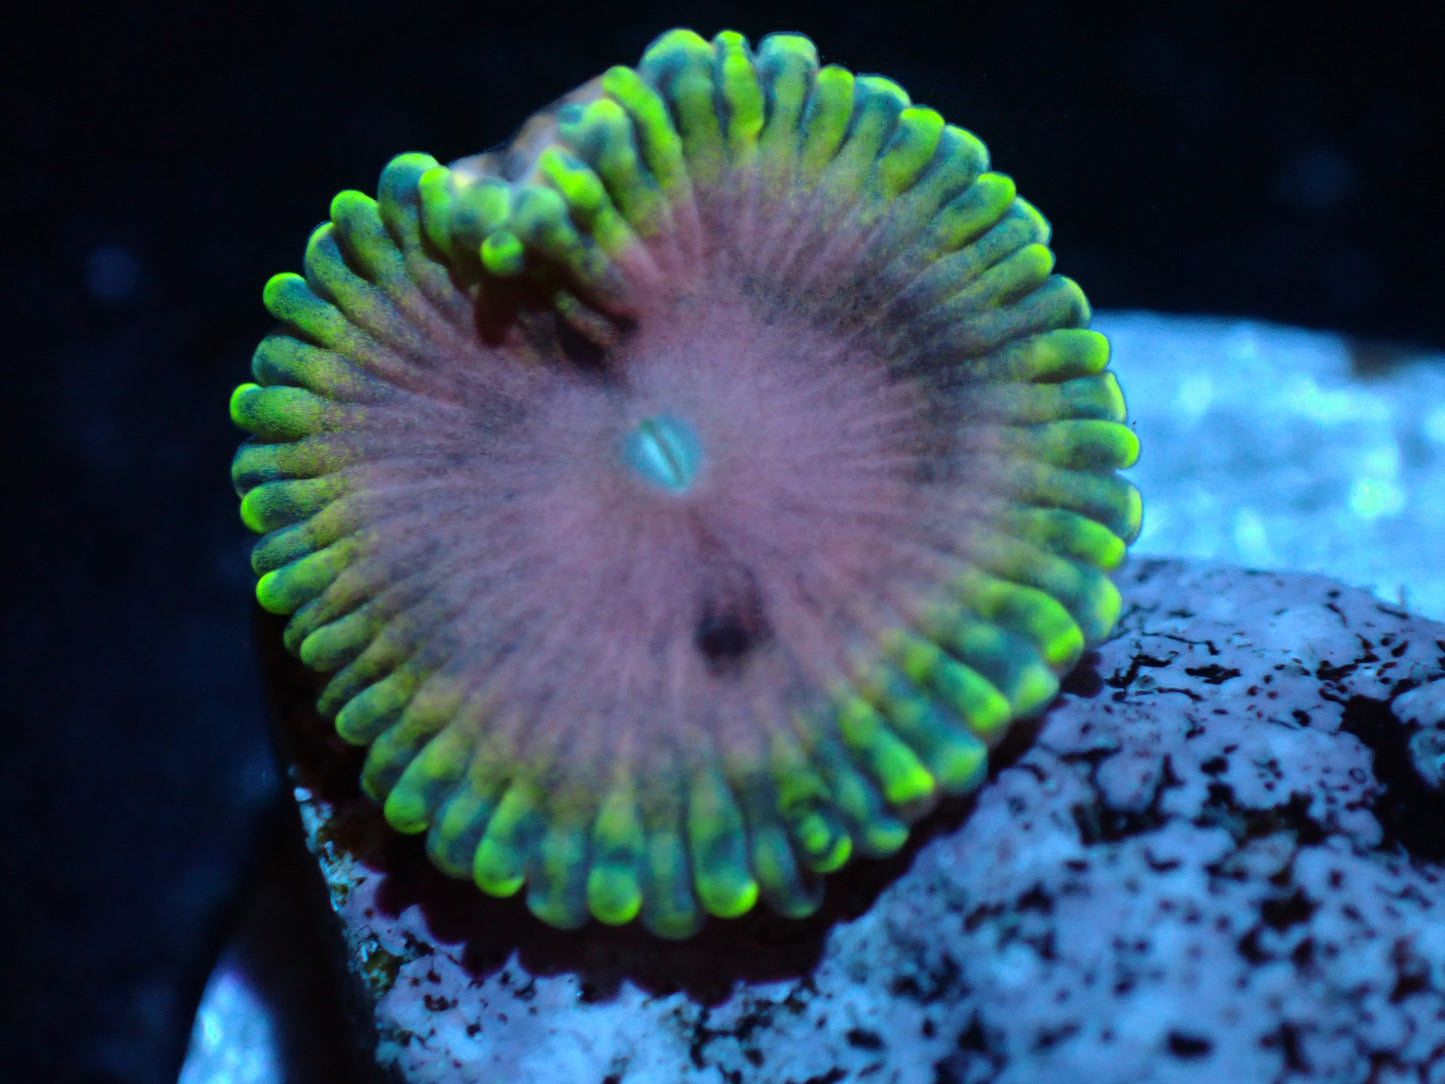 Pink Diamond Zoa Auctions 4/8 ended